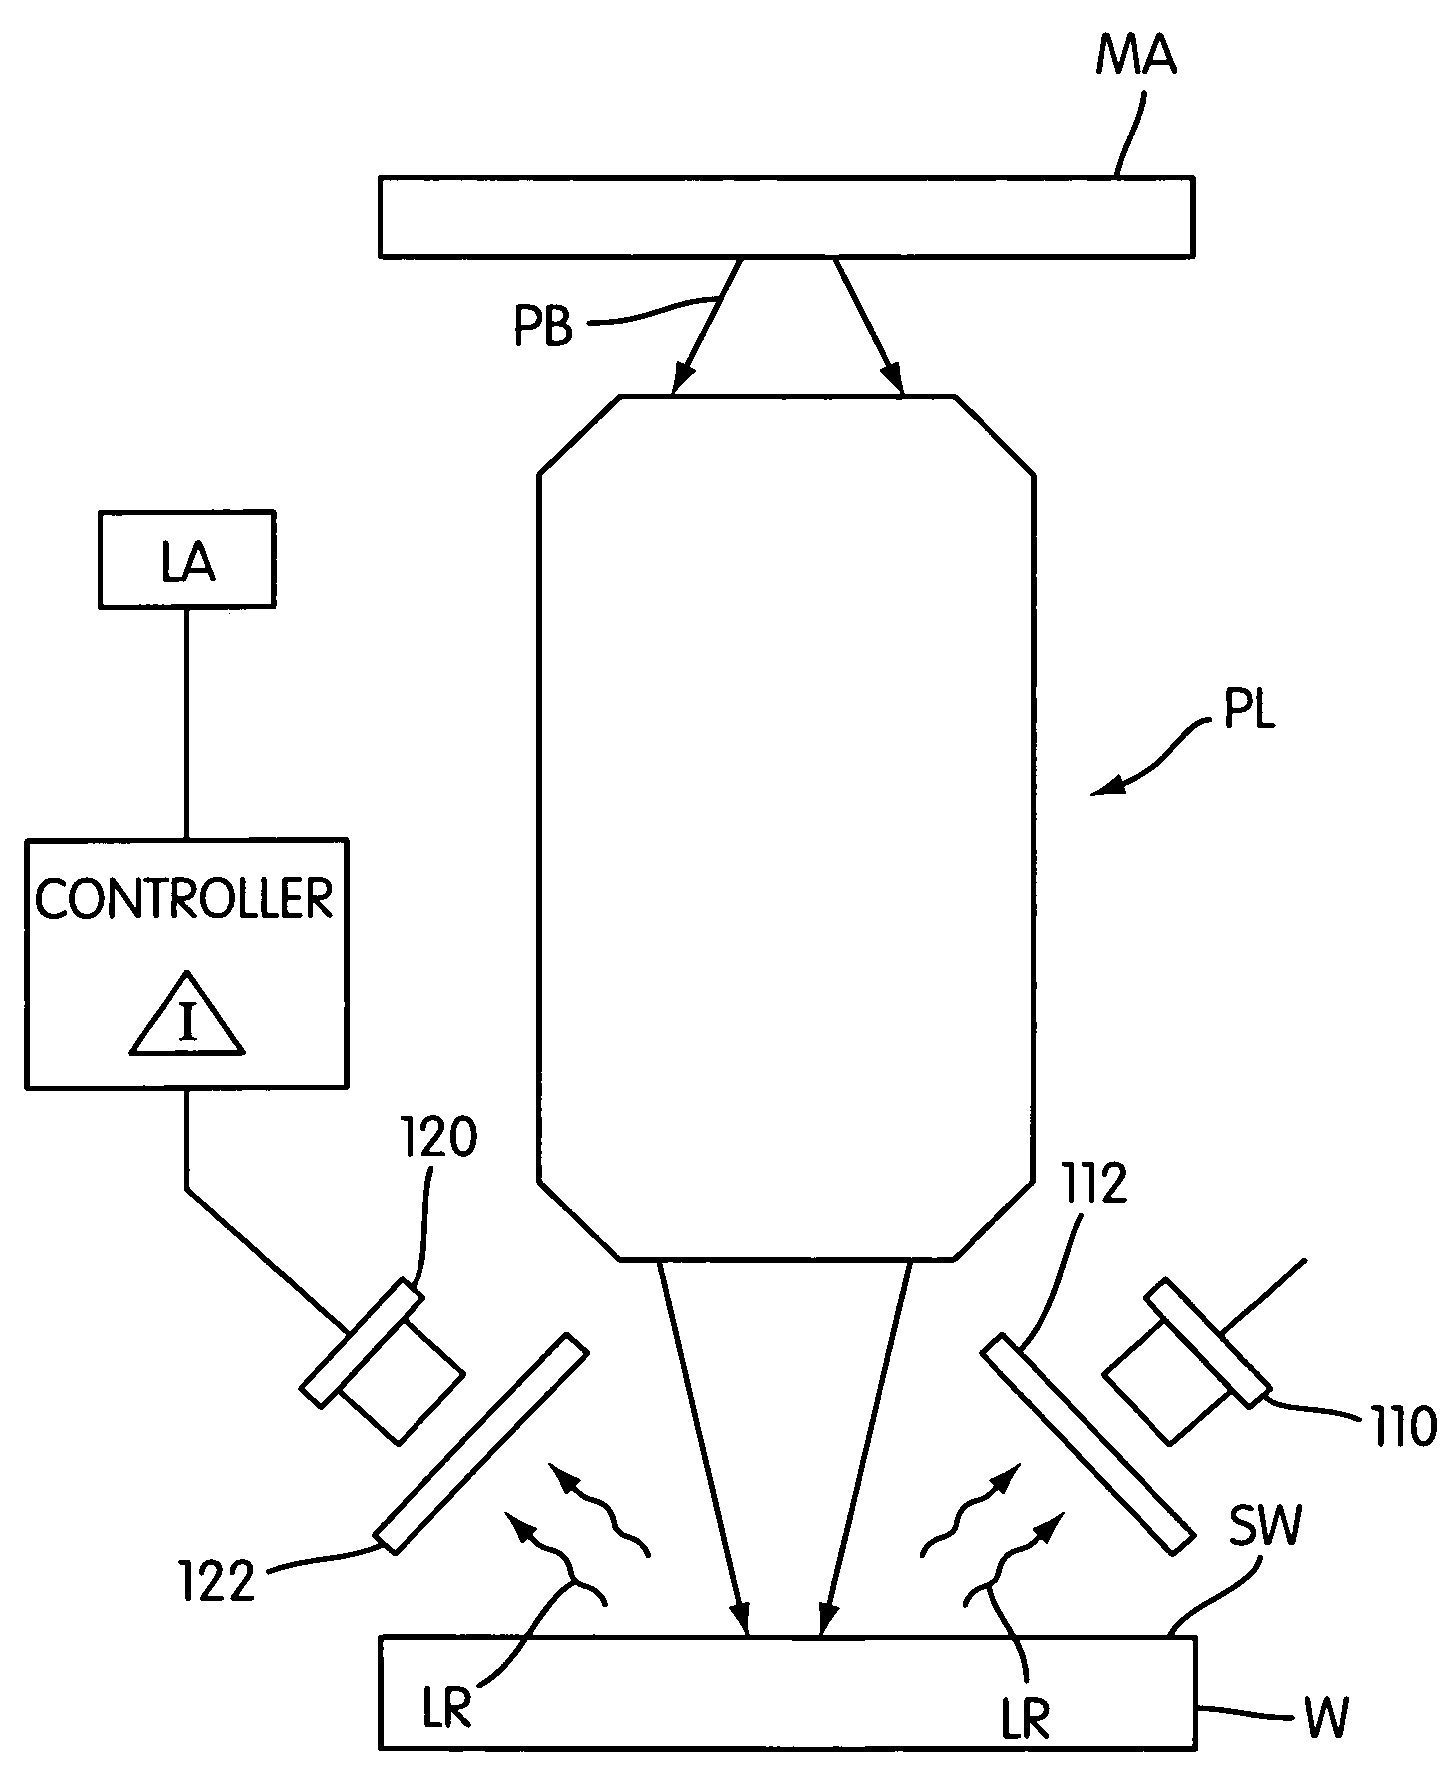 Lithographic apparatus, method of manufacturing a device, and device manufactured thereby